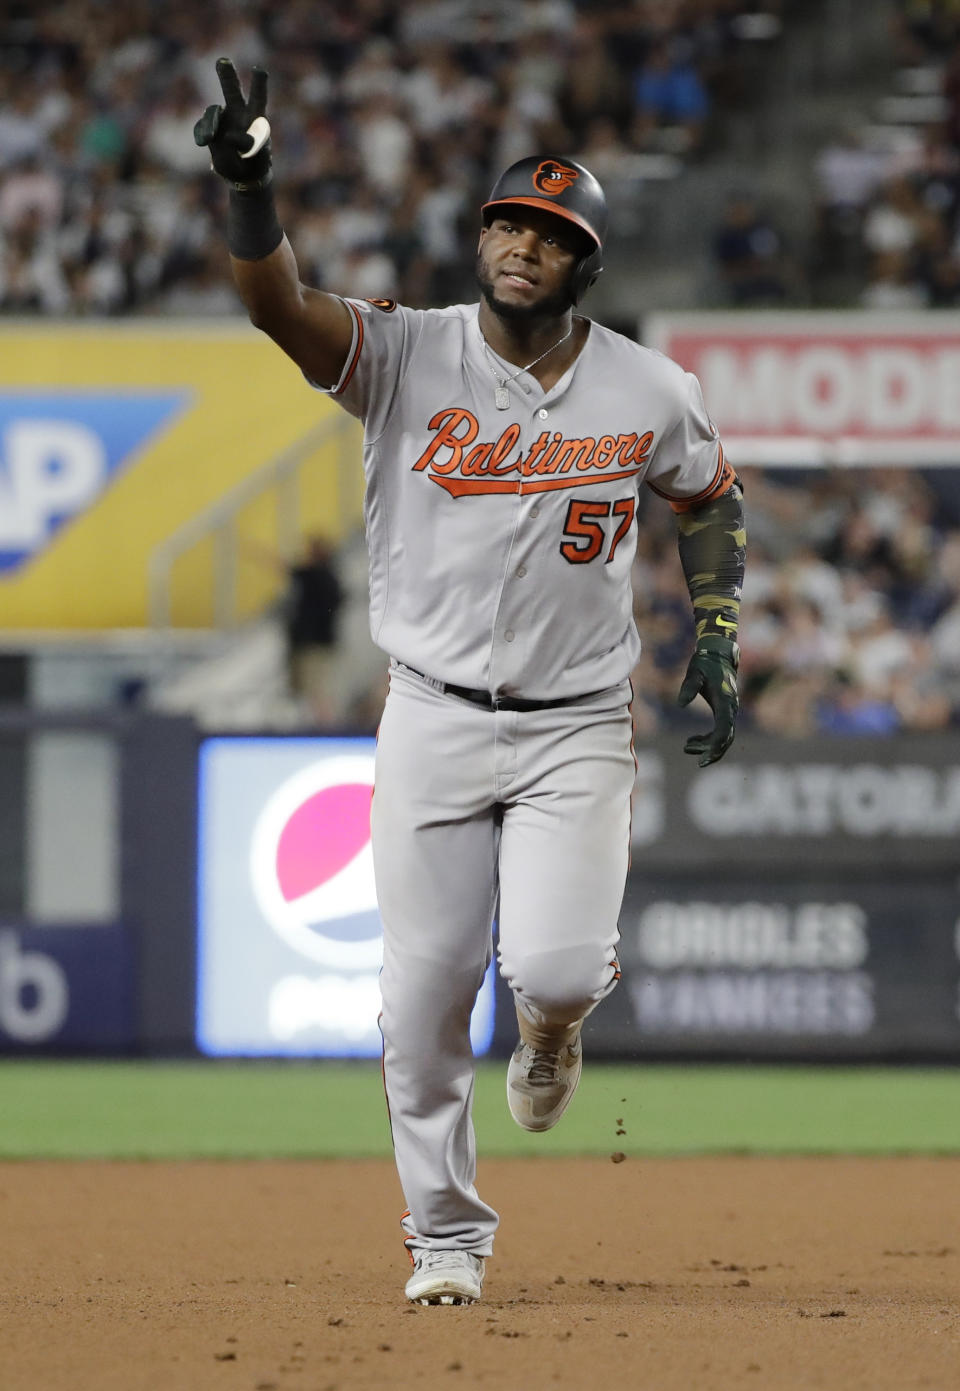 Baltimore Orioles' Hanser Alberto gestures to fans as he runs the bases after hitting a three-run home run during the seventh inning of the second game of a baseball doubleheader against the New York Yankees, Monday, Aug. 12, 2019, in New York. (AP Photo/Frank Franklin II)